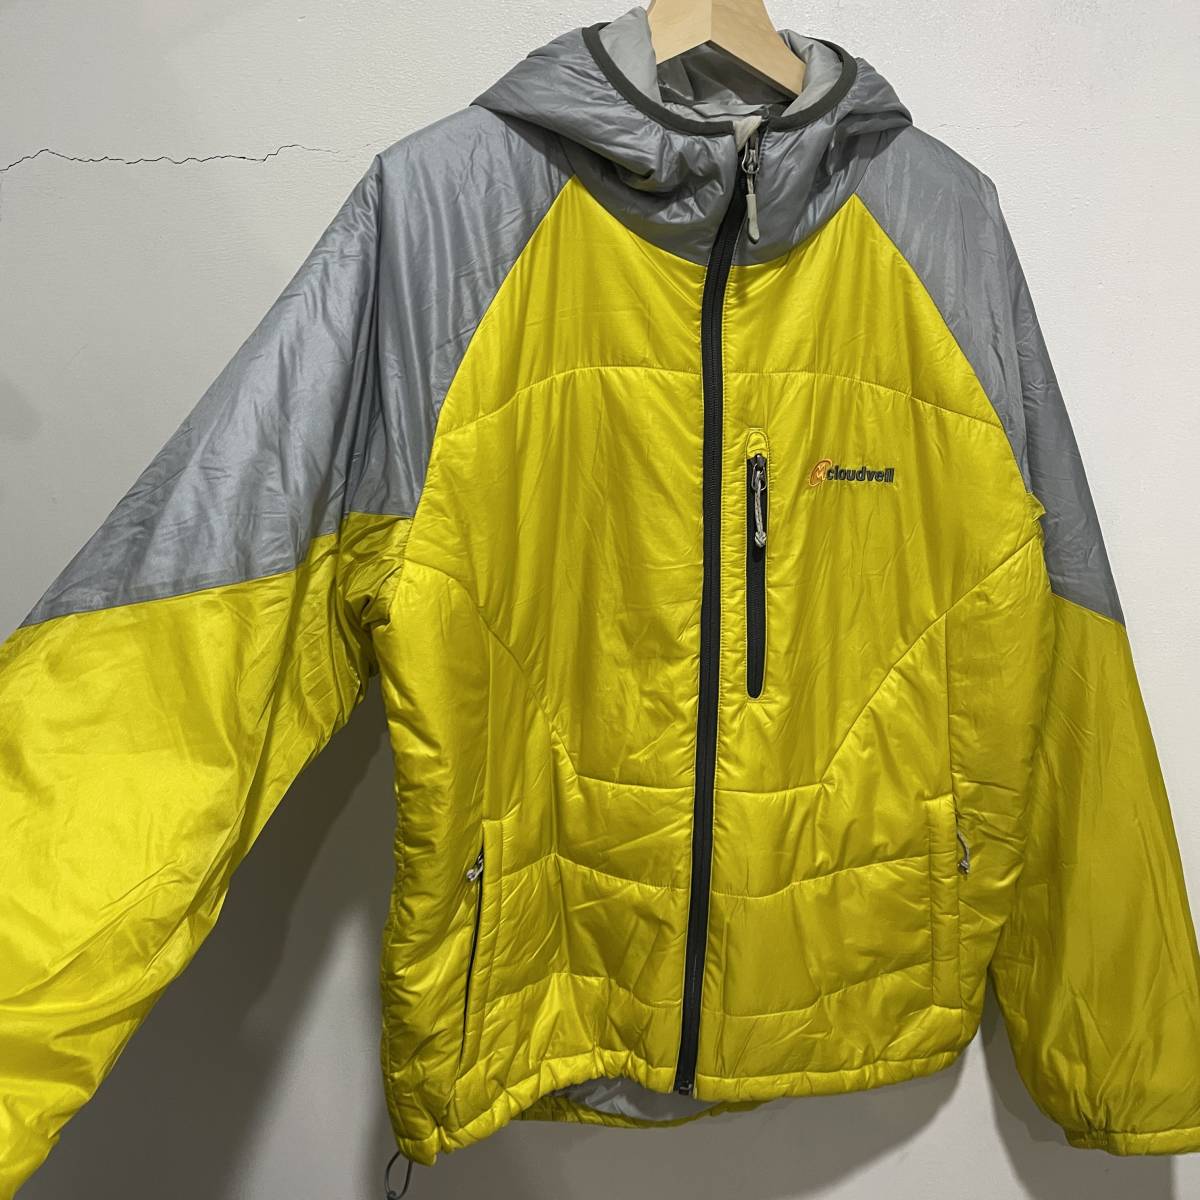  free shipping * great popularity *CLOUDVEIL* switch . cotton inside with a hood . jacket * Prima loft * protection against cold .** climbing * mountain climbing *D7c